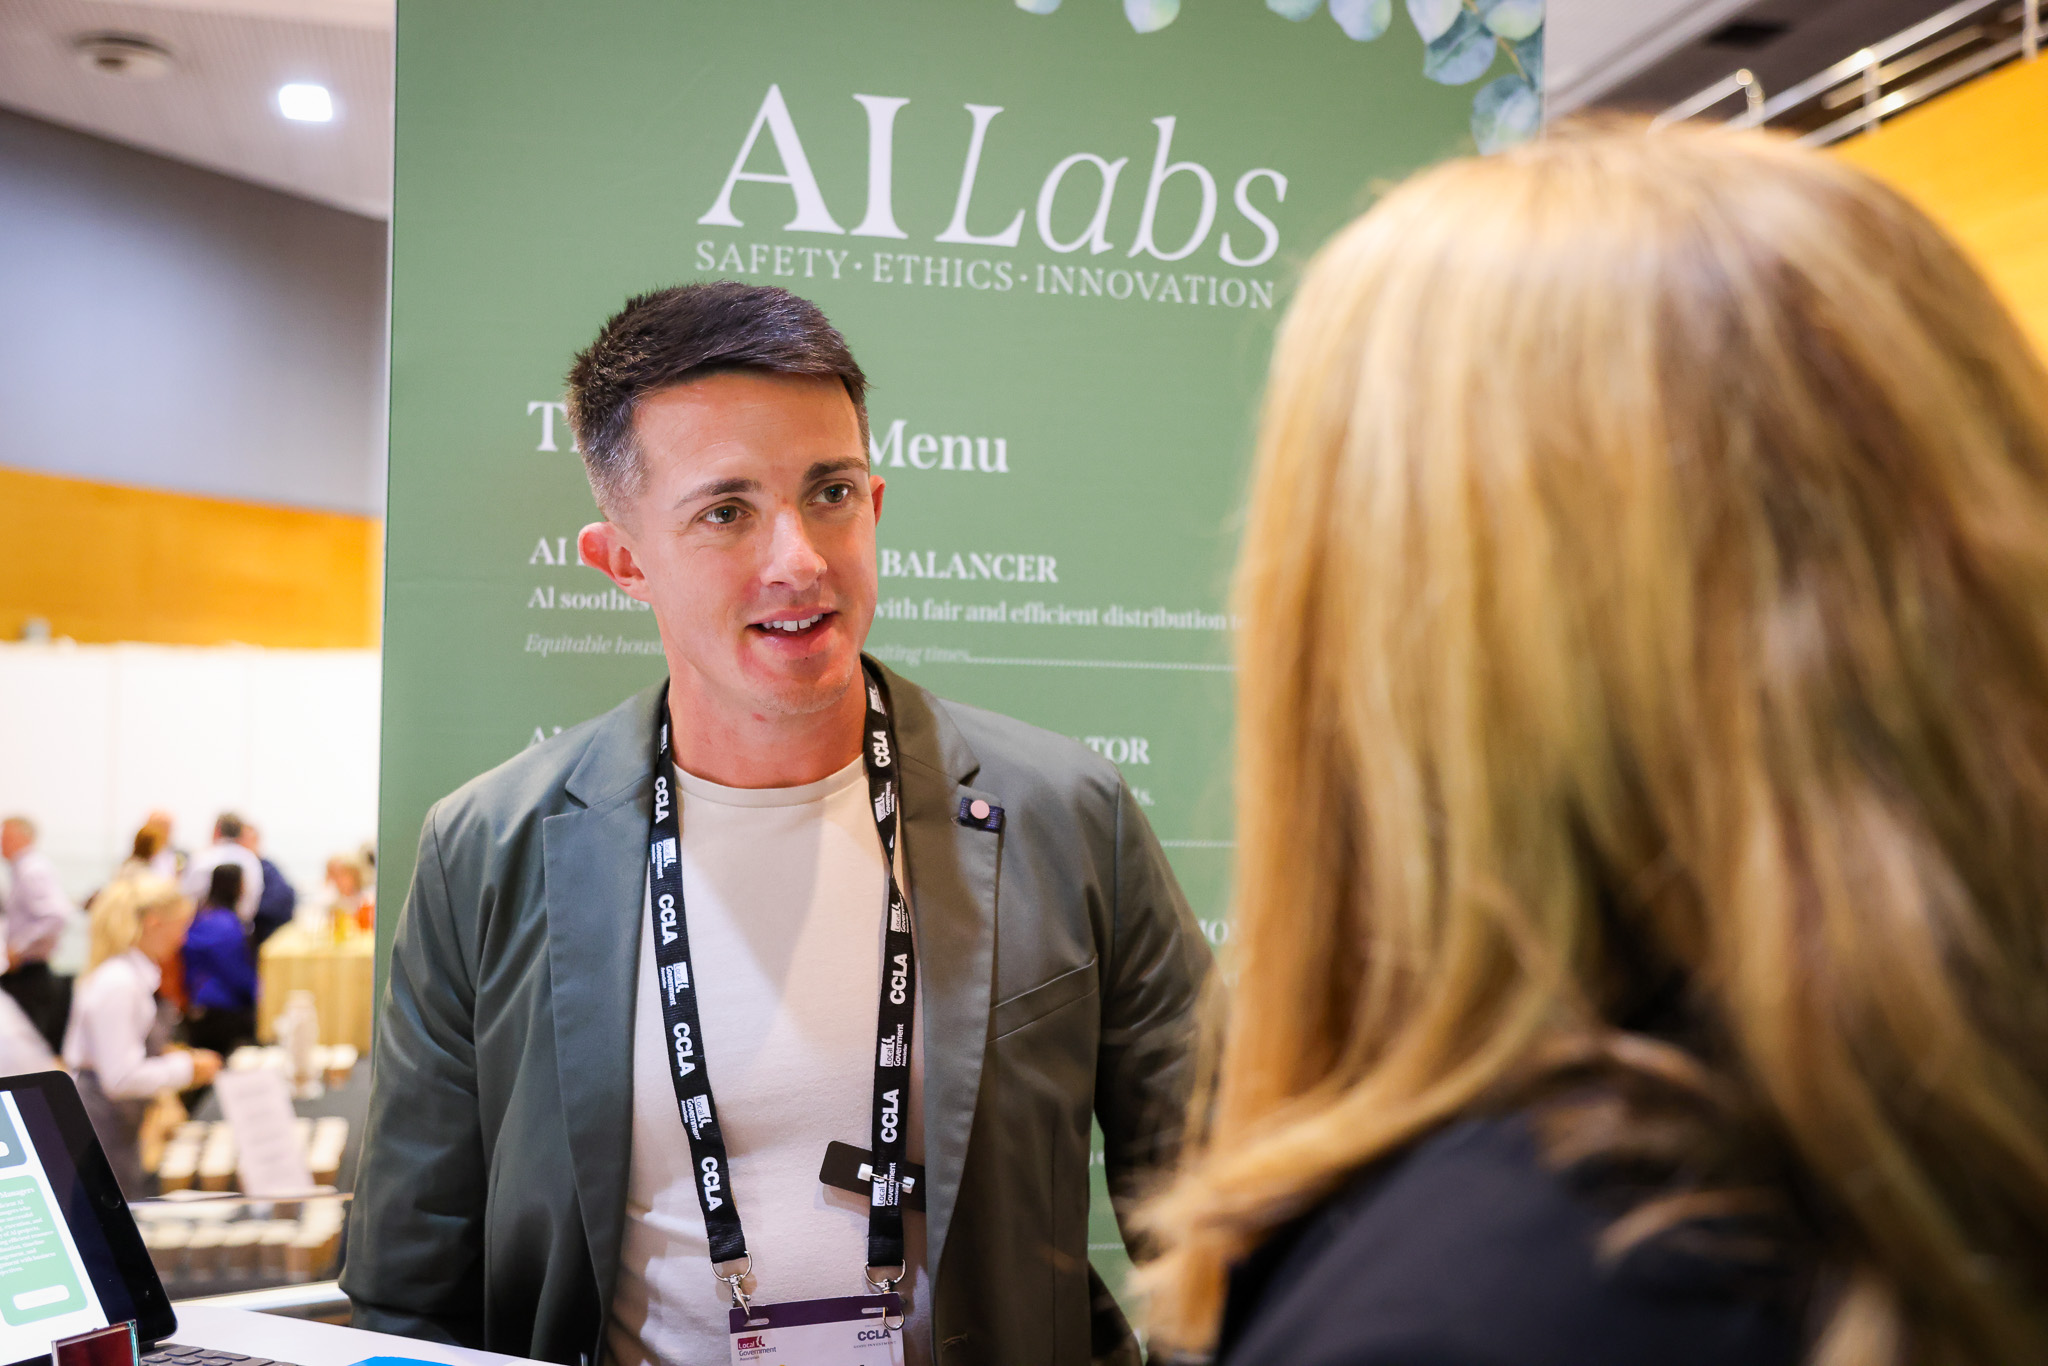 Lewis Sheldrake talking to a delegate at a conference stand